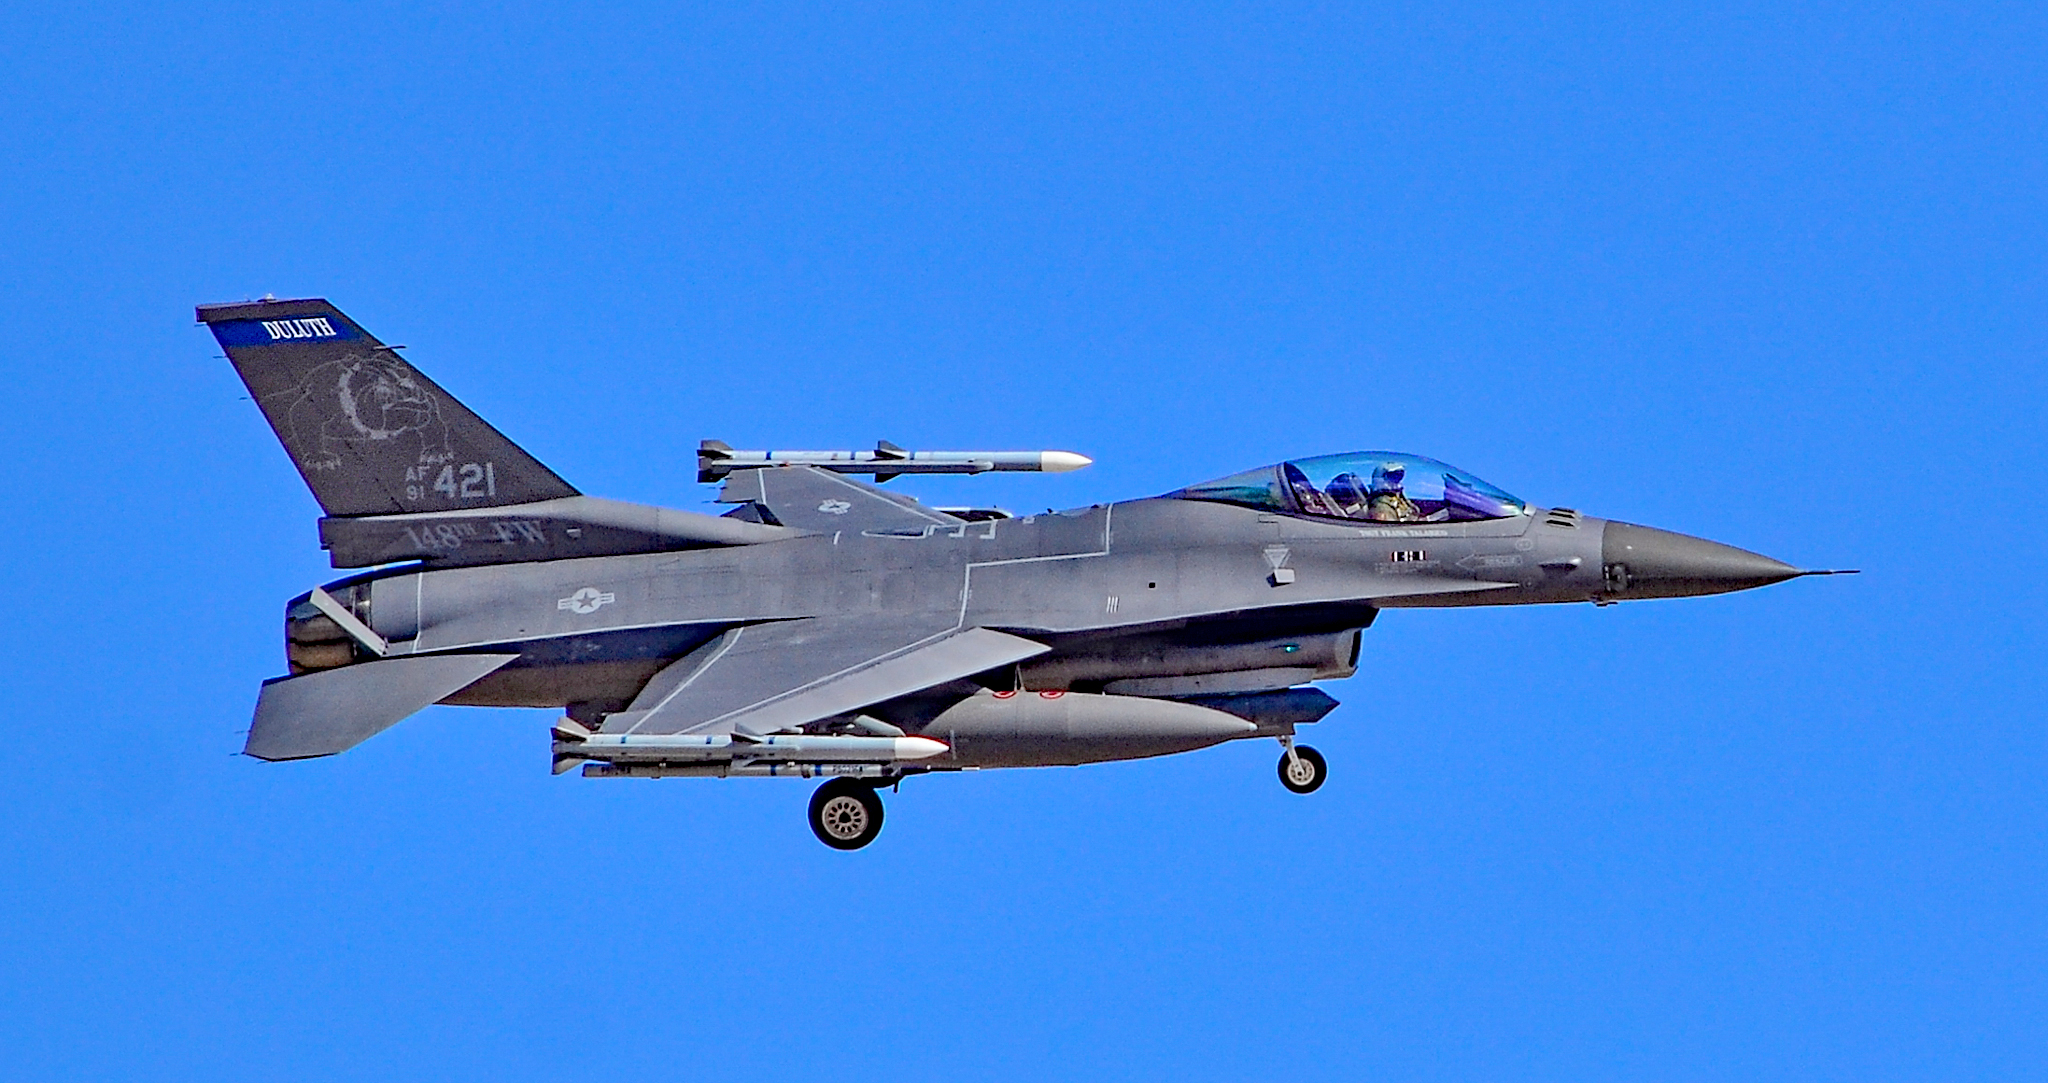 The Minnesota Air National Guard has upgraded its F-16 fighters with the latest AESA radars